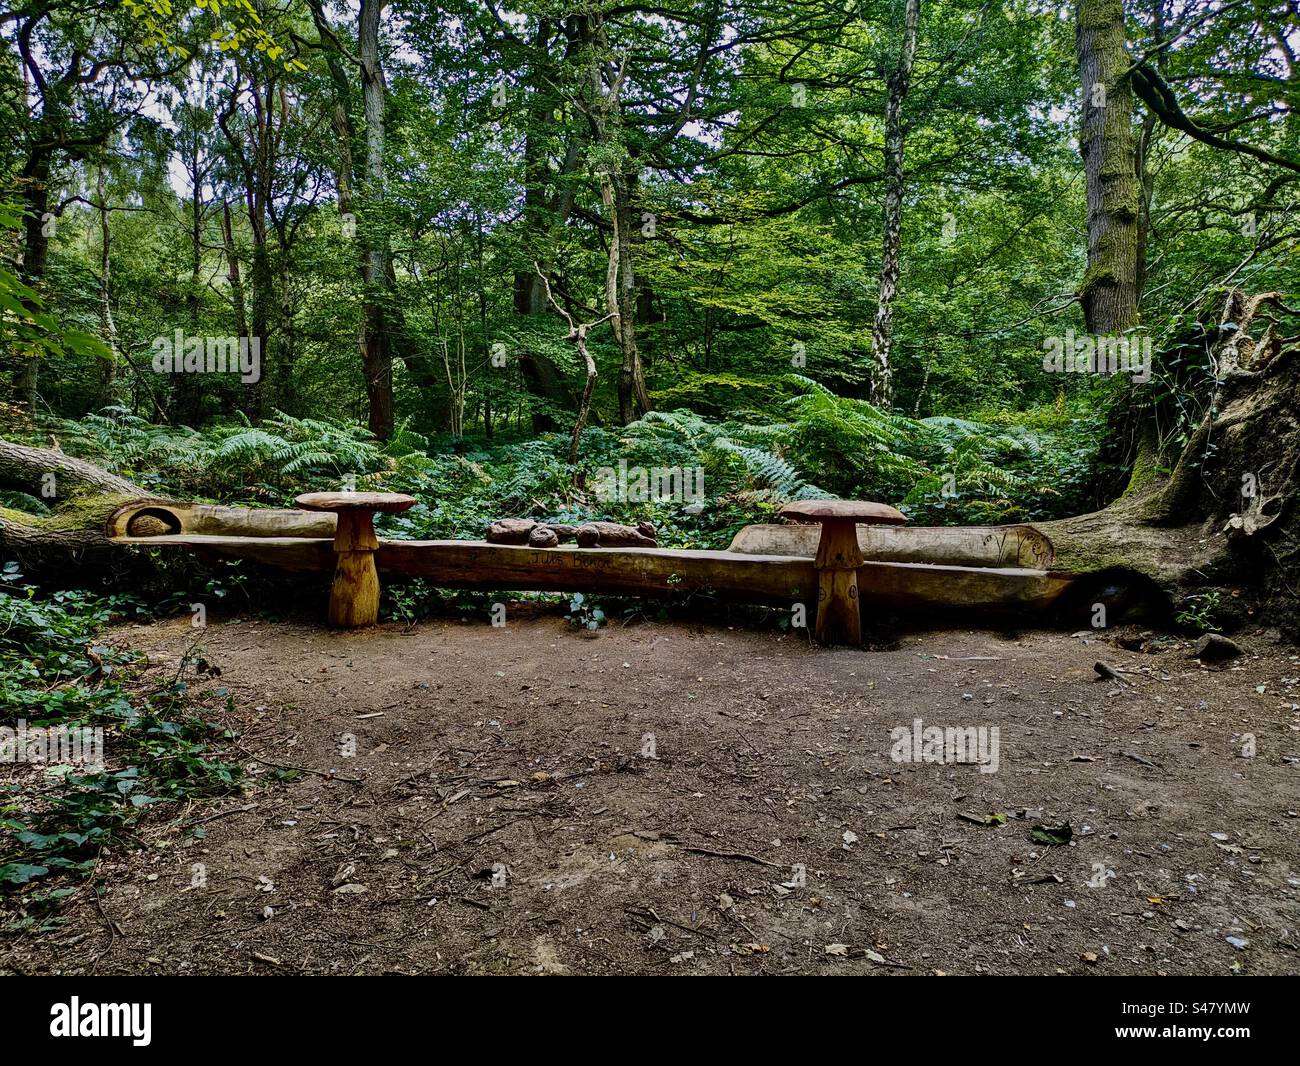 Fallen tree felled bench art sculpture Walking on a path wood tree countryside nature trees plant plants English park outside south of England 11-10-23 Stock Photo